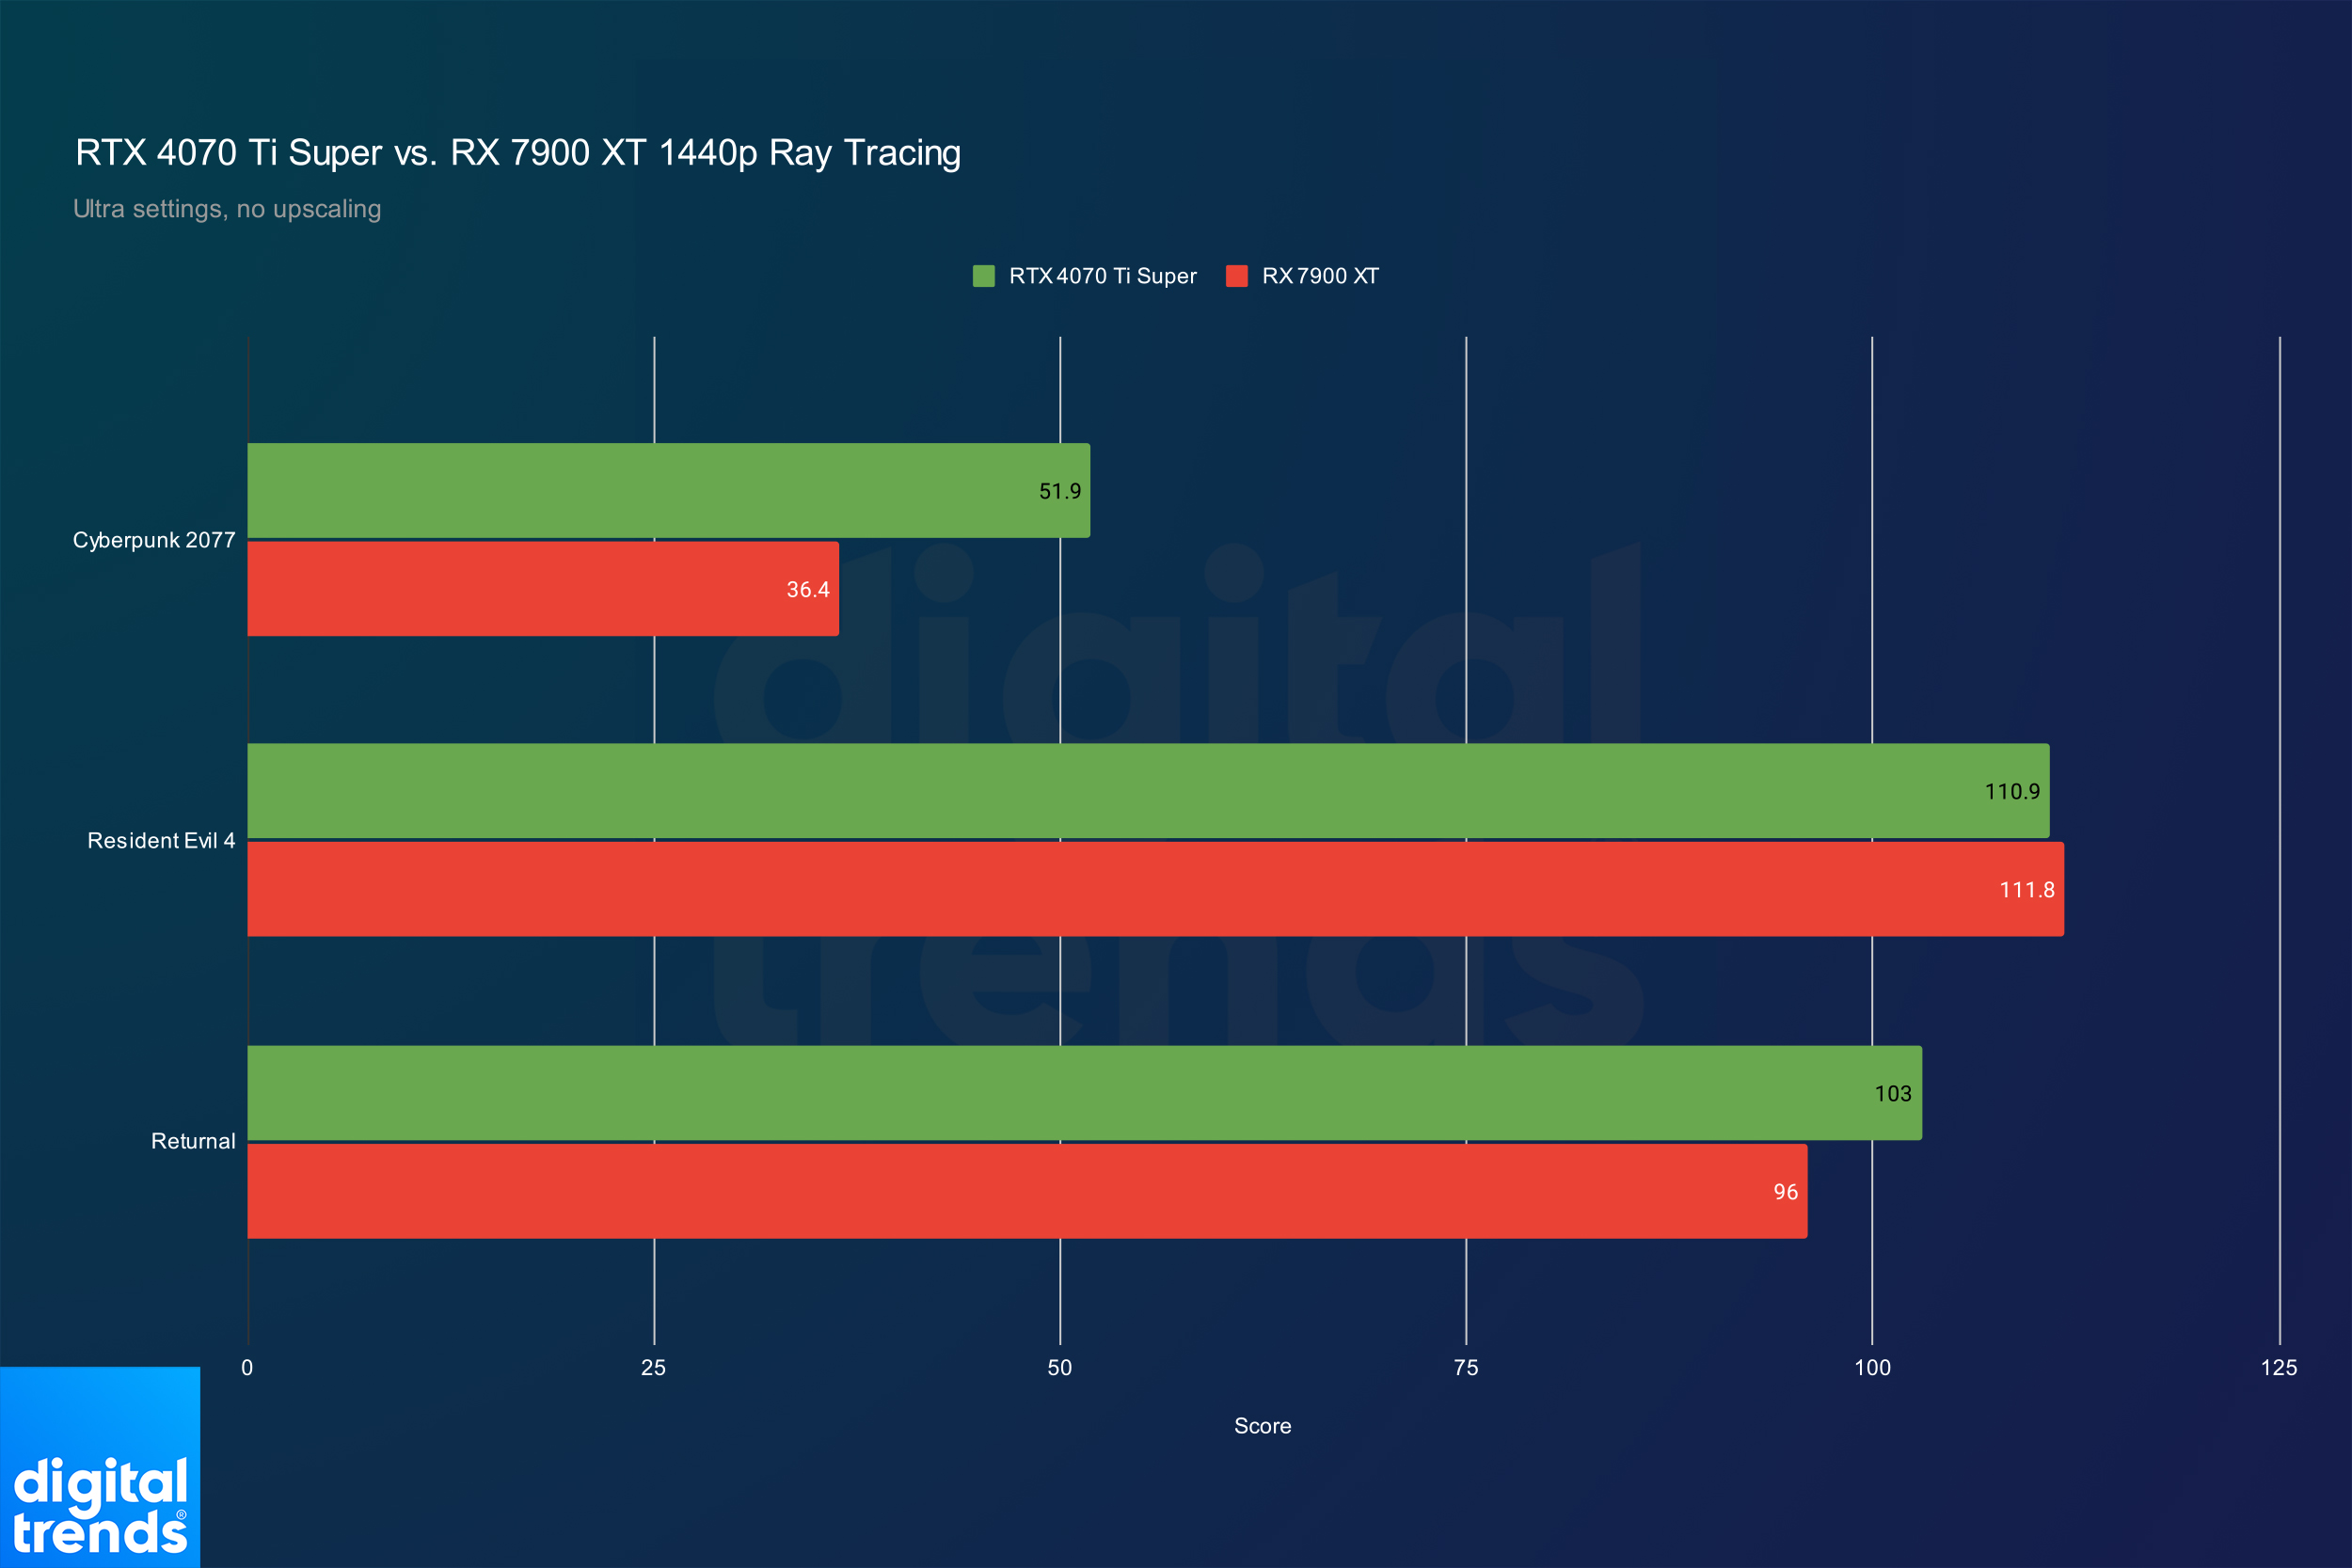 Ray tracing benchmarks for the RX 7900 XT and RTX 4070 Ti Super at 1440p.